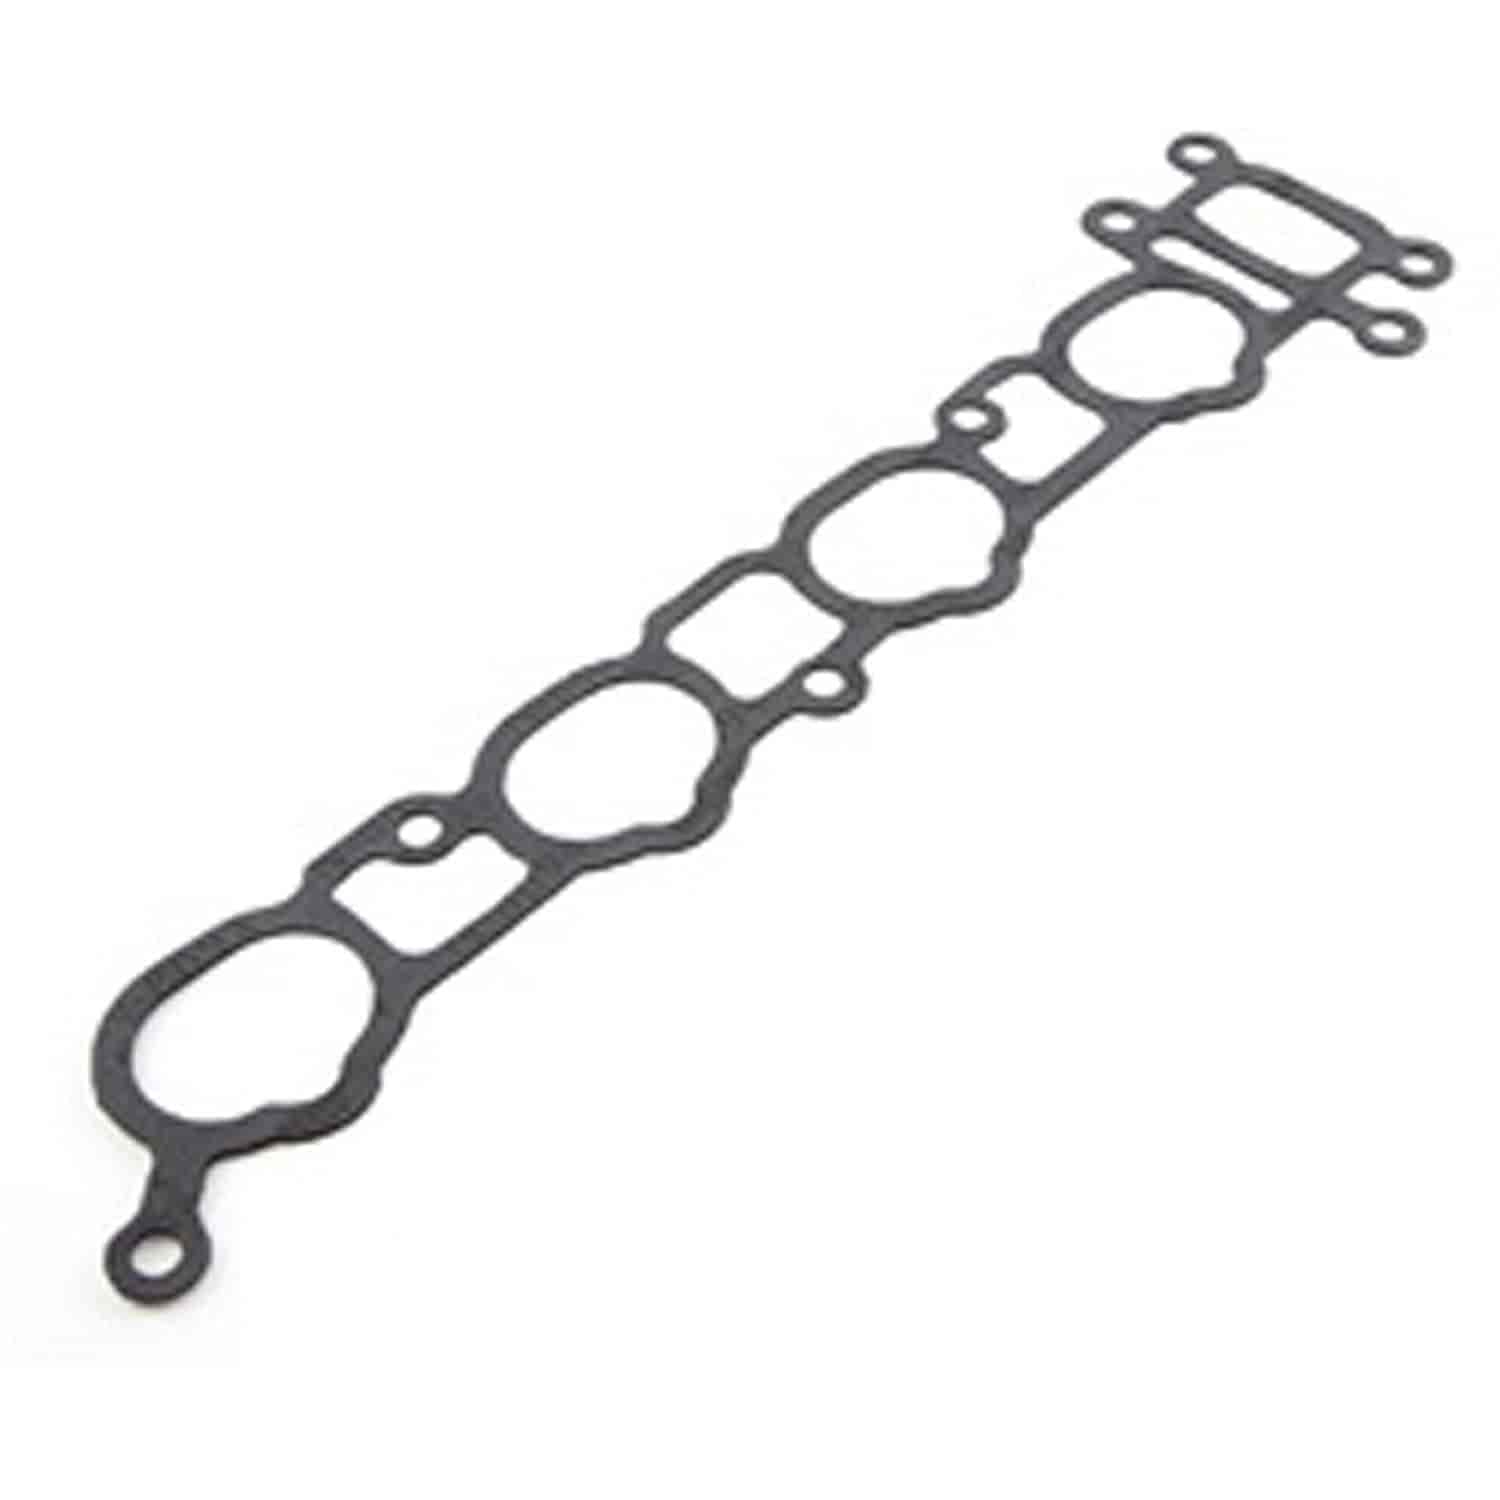 This intake Manifold Gasket from Omix-ADA for 2003-2006 Wrangler 2002-2005 Liberty with 2.4L.